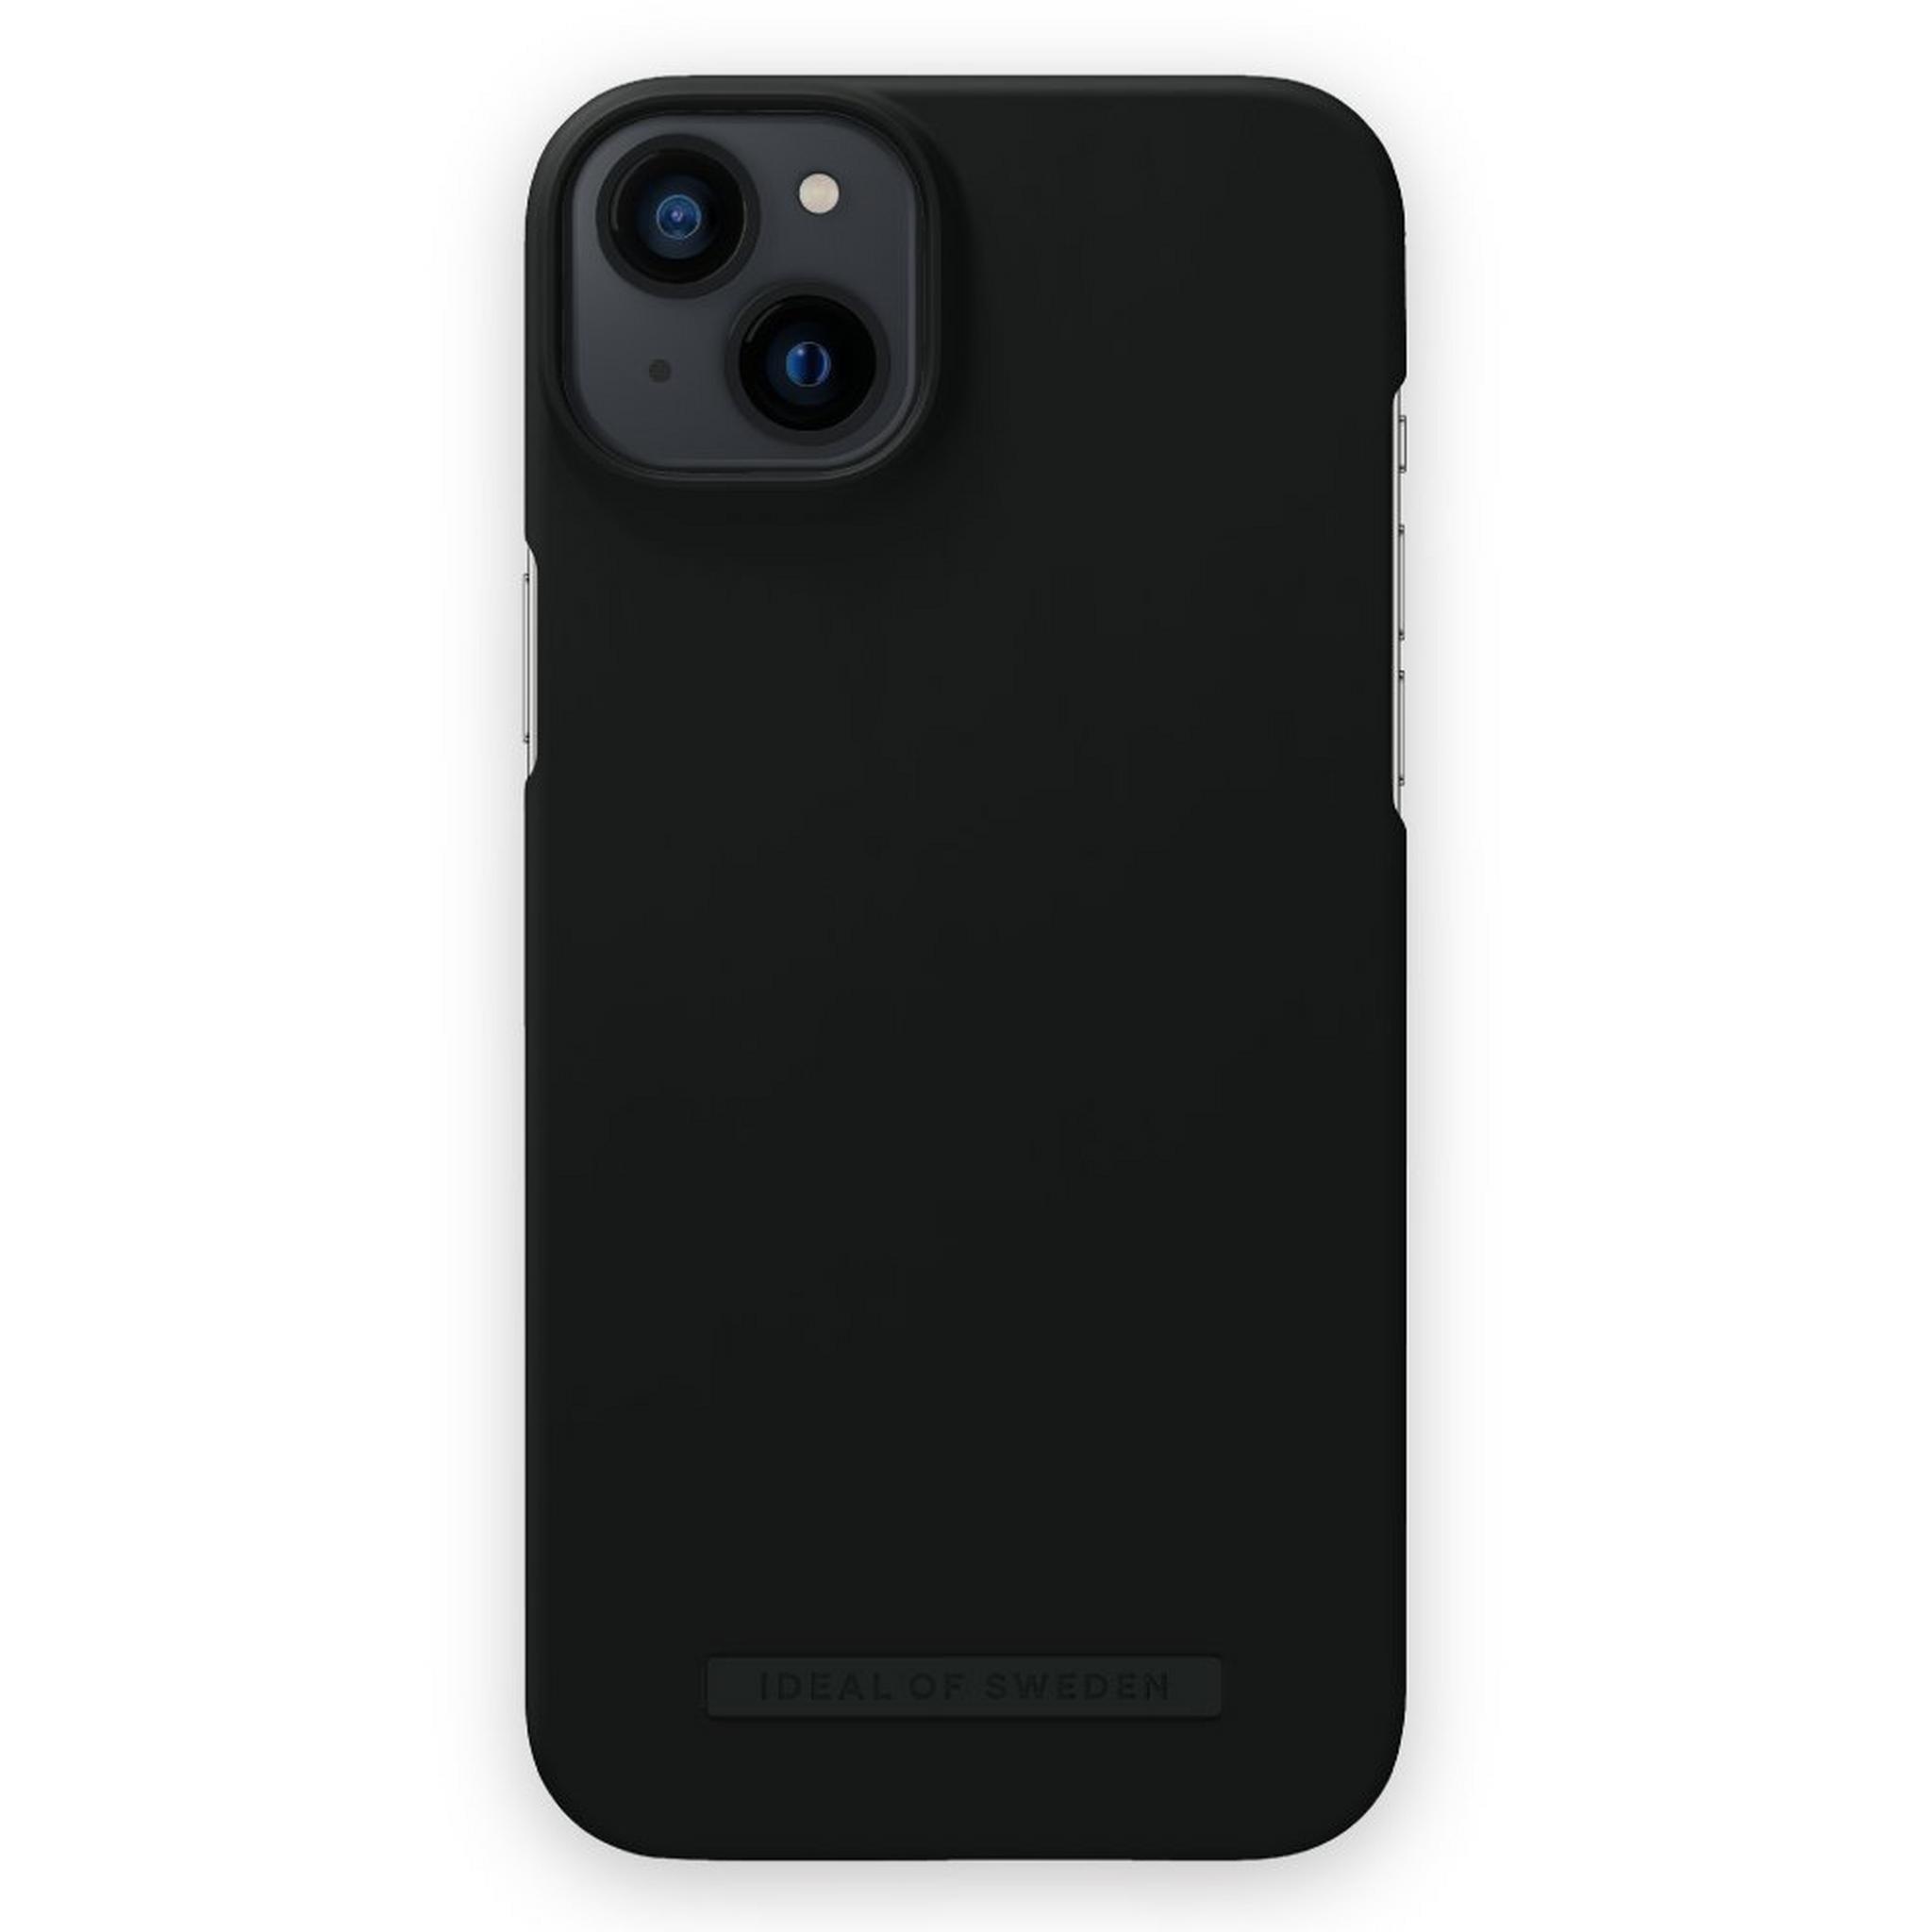 Ideal of Sweden Case w/MagSafe for iPhone 14 Pro - Coal Black